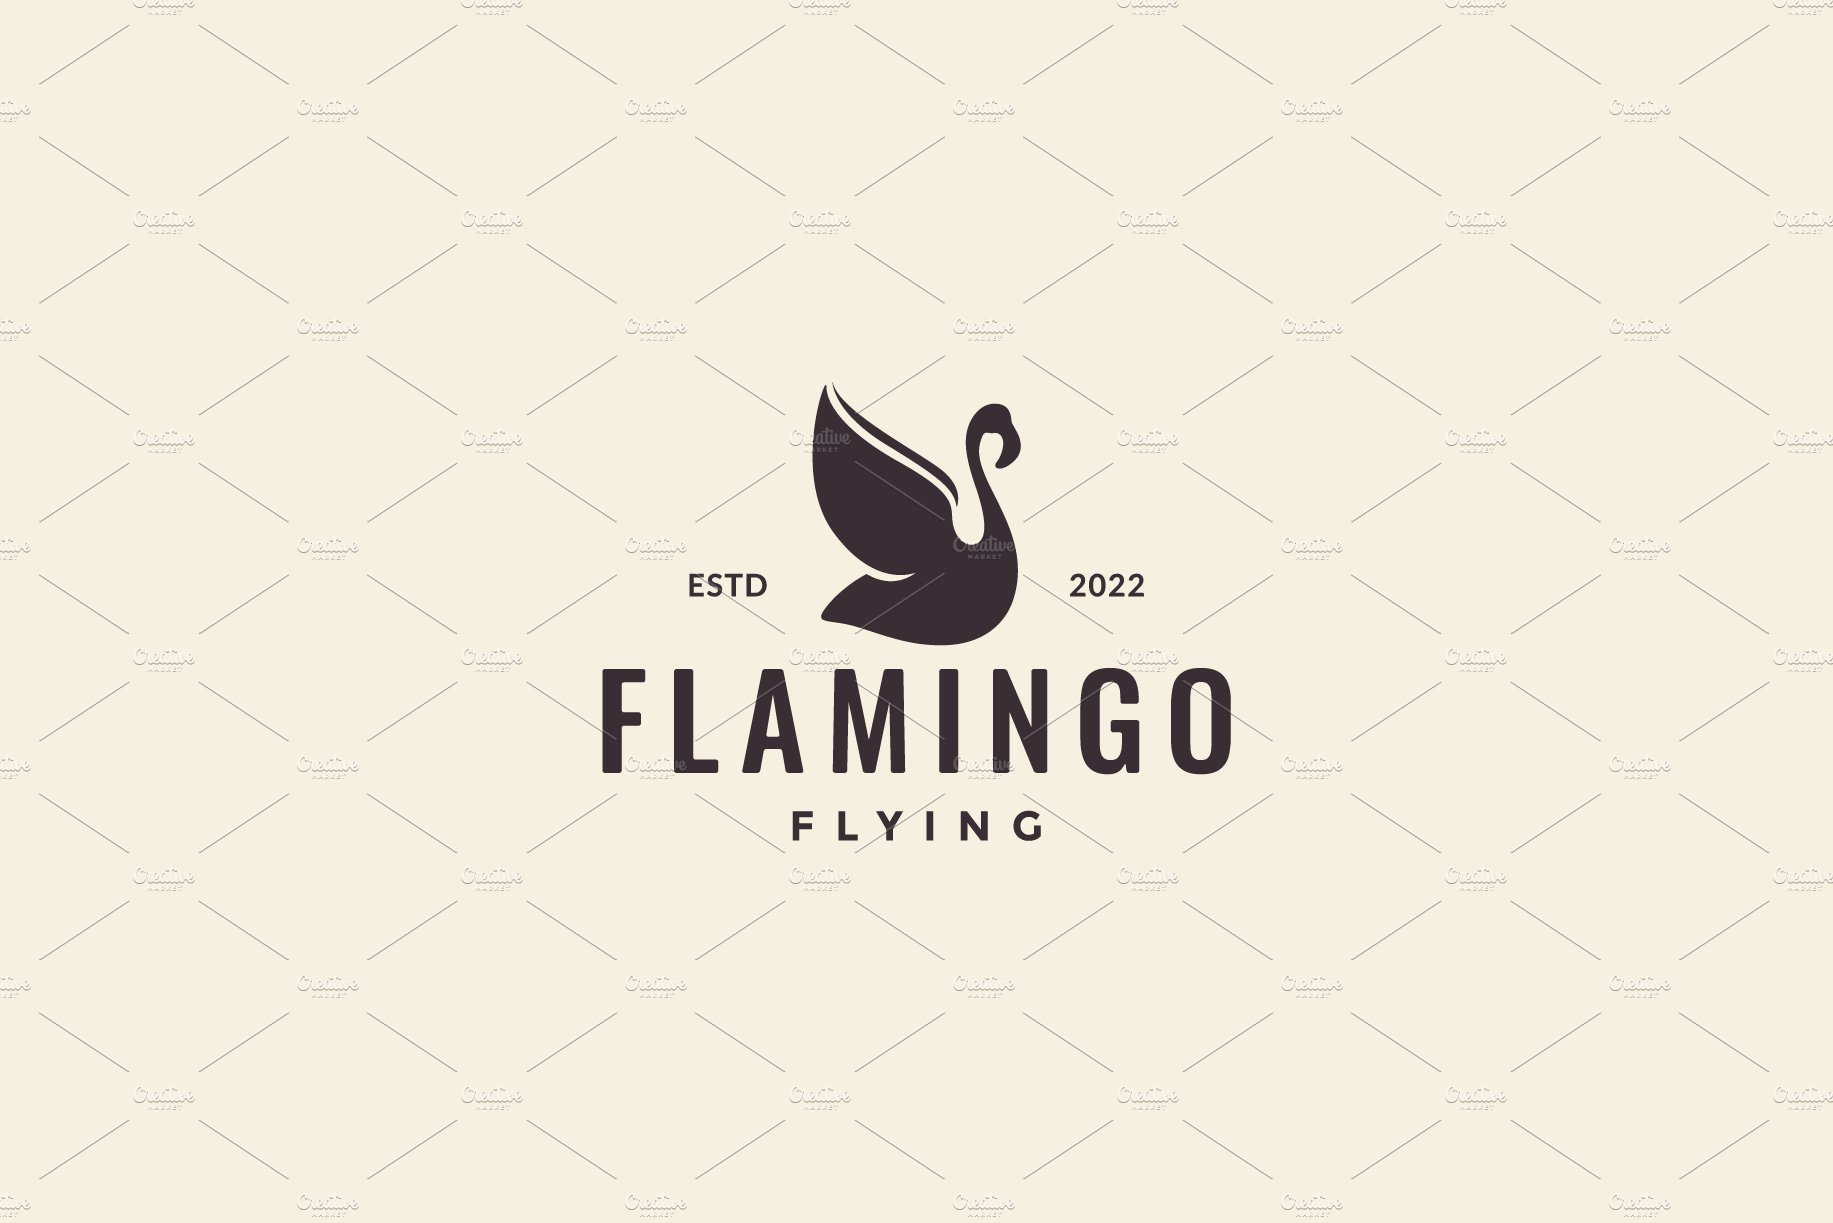 flaying flamingo silhouette logo cover image.